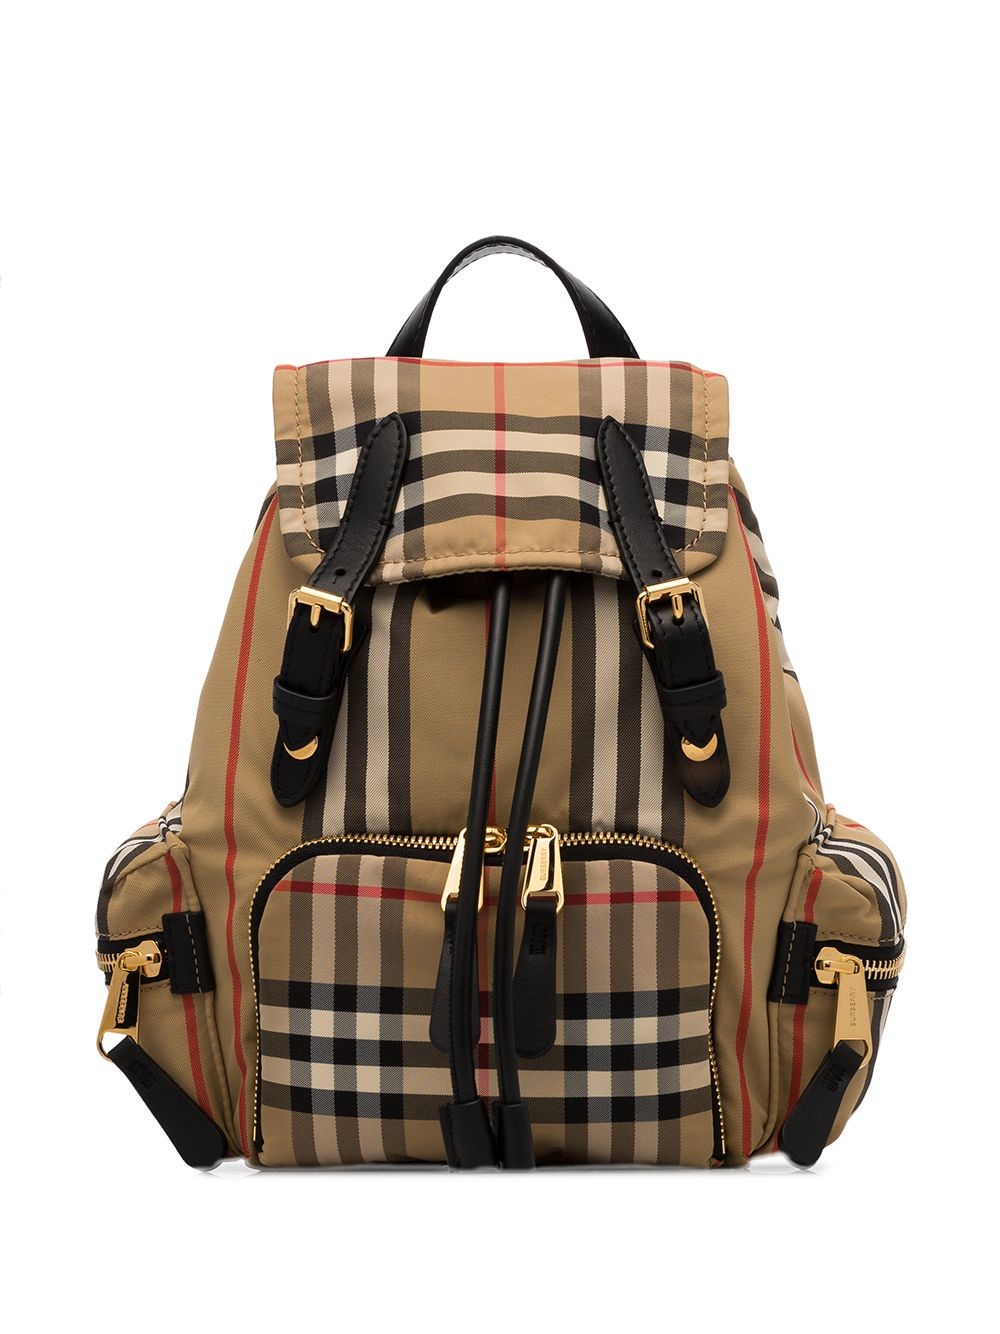 burberry backpack bags